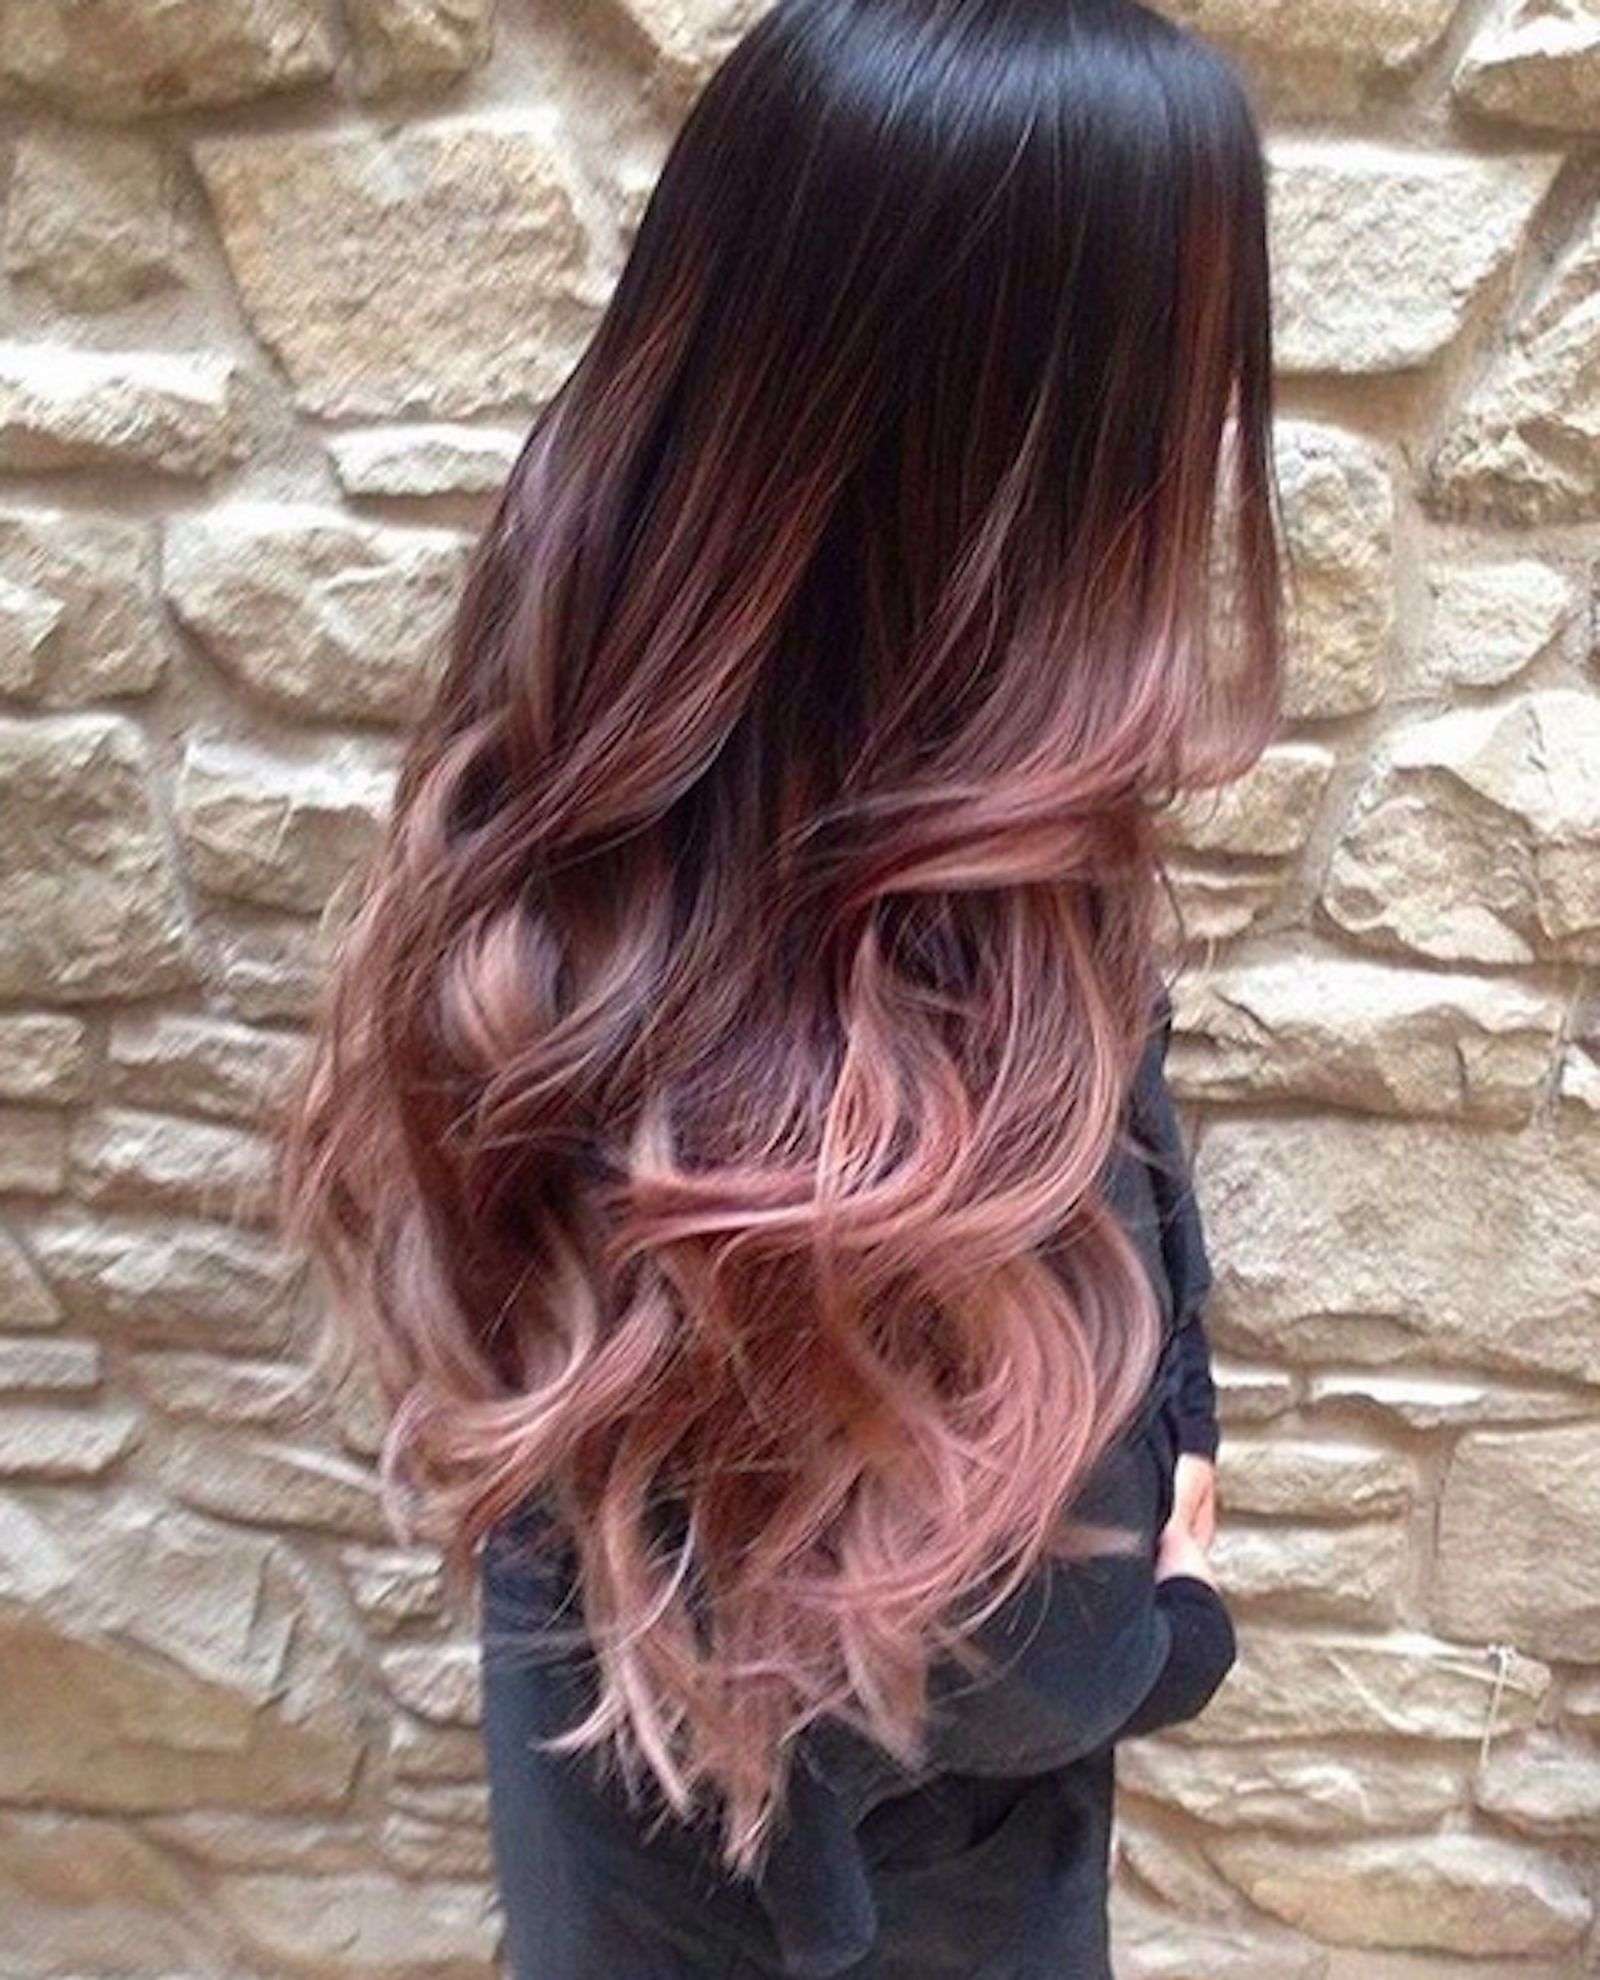 Black to rose gold ombre